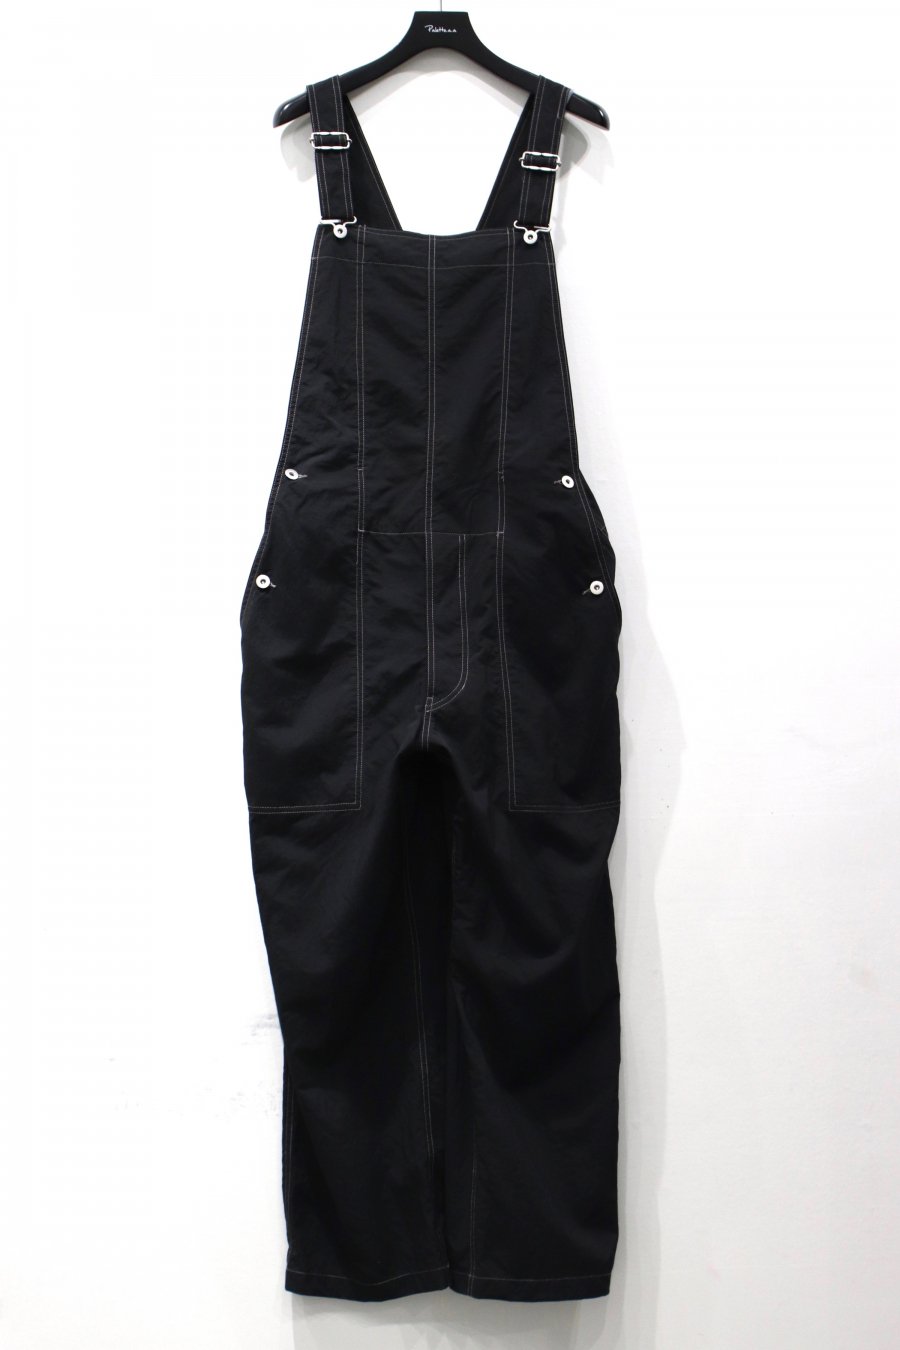 KIIT  WASHABLE HIGHCOUNT NYLON CANVAS OVERALLS(BLACK)<img class='new_mark_img2' src='https://img.shop-pro.jp/img/new/icons15.gif' style='border:none;display:inline;margin:0px;padding:0px;width:auto;' />